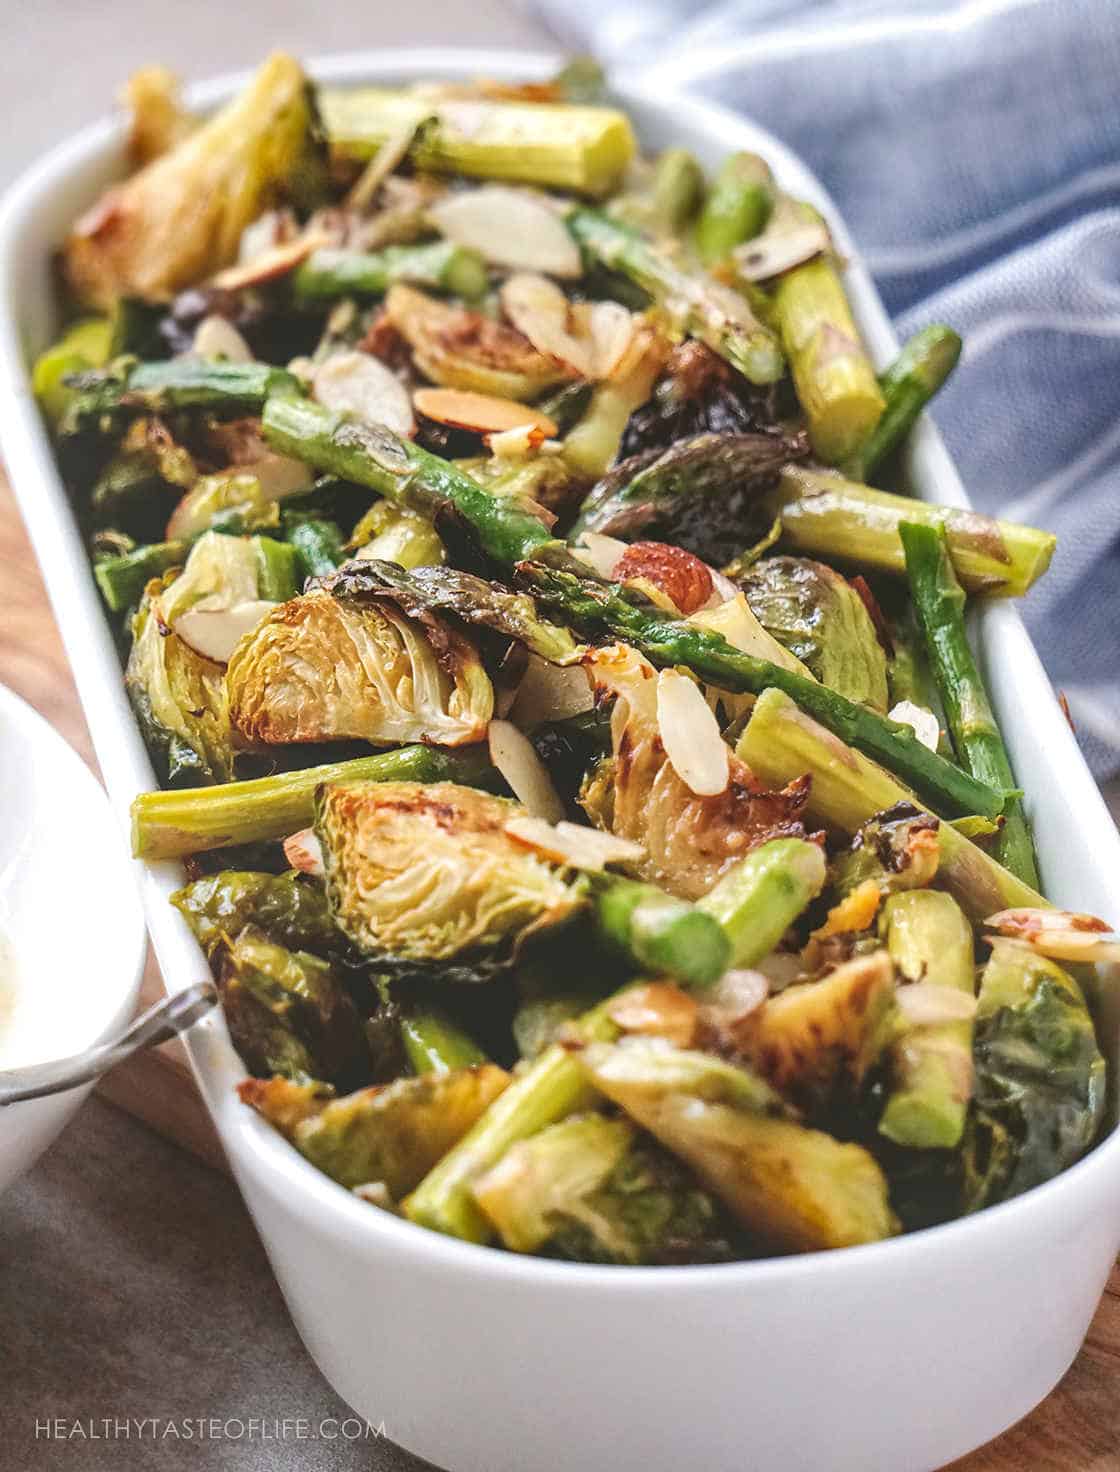 Looking for Healthy Vegan Brussels Sprouts Recipes to serve as a side dish or dinner? Check out this easy oven roasted Brussels sprouts recipe with asparagus and toasted almonds – all crispy served with a sweet and tangy mustard sauce. Perfect for Thanksgiving and Christmas holiday table. #brusselssprouts  #vegan  #sidedish  #holidaysidedish #brusselsprouts